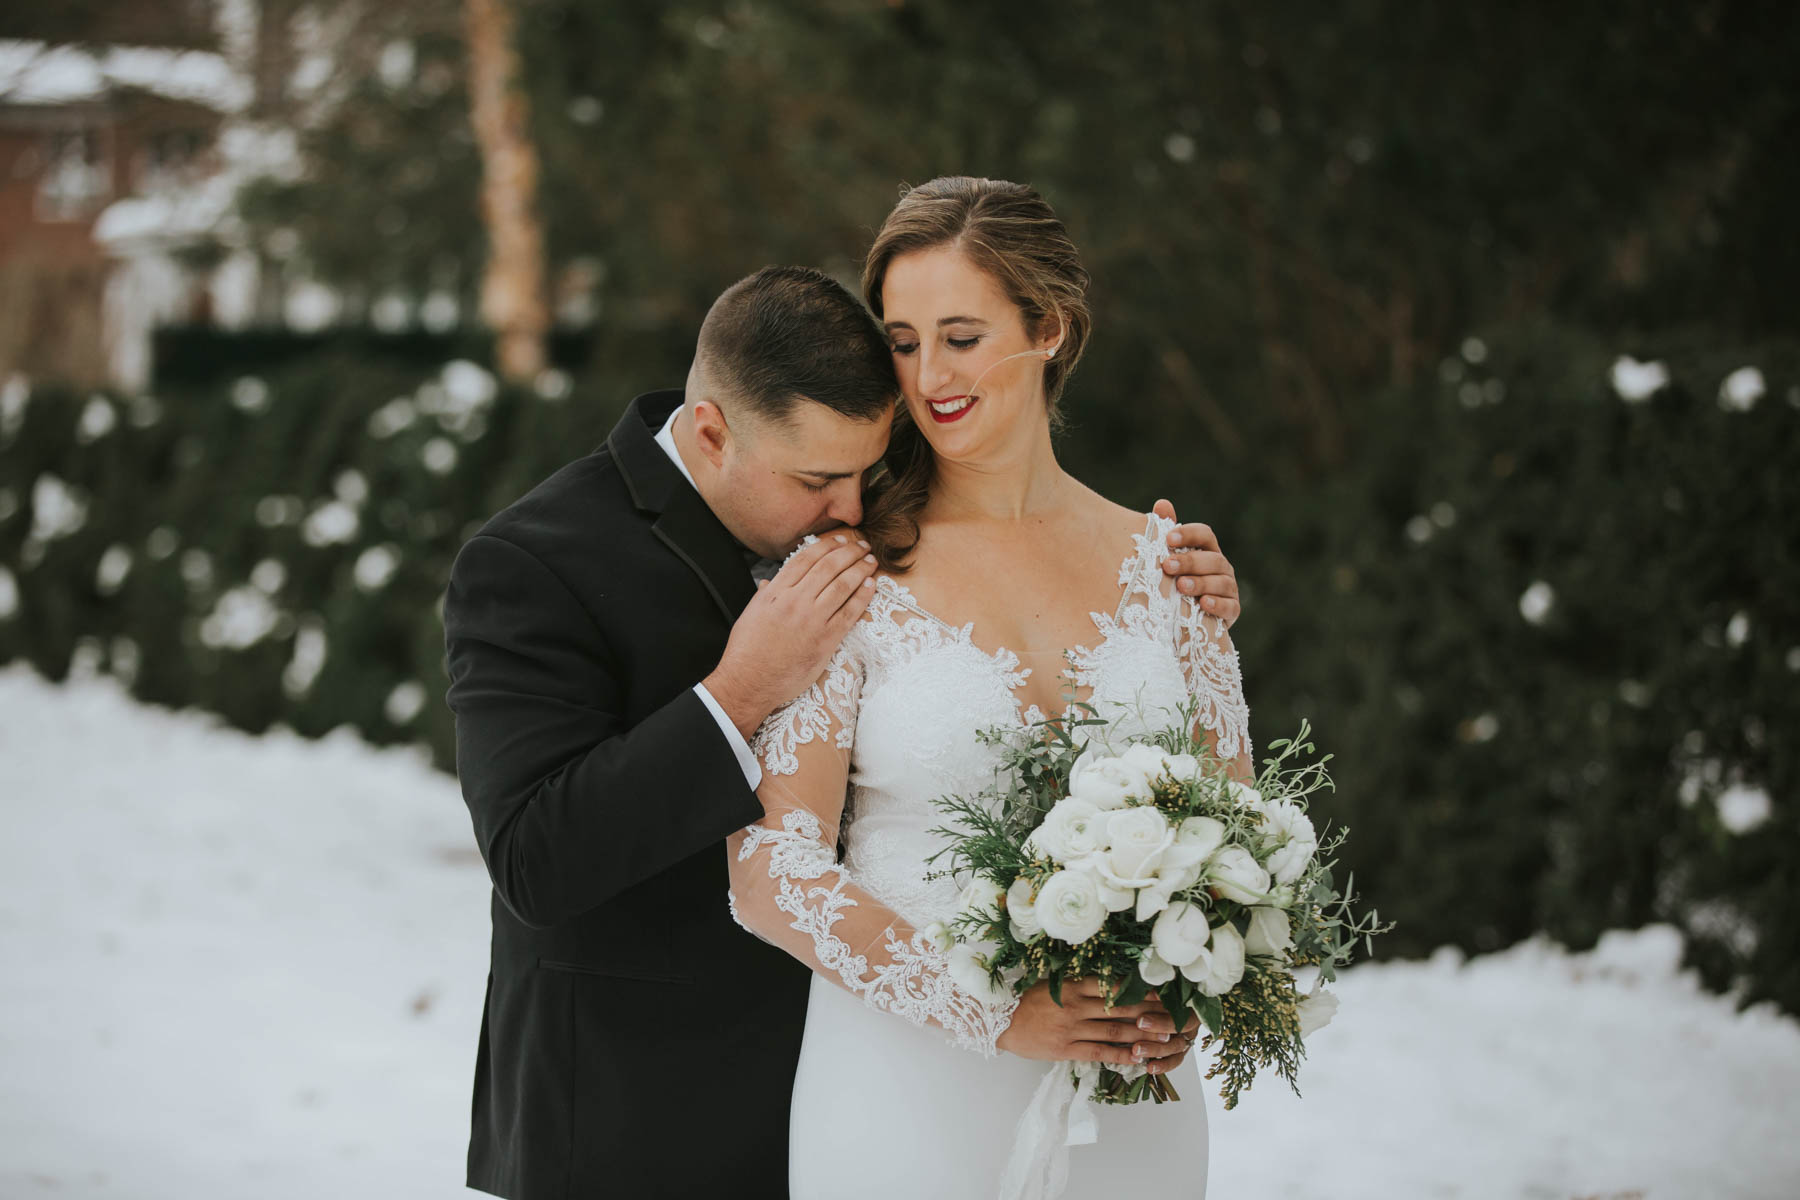 Genuine Wedding Portraits at the Woodstock Inn and Resort by Amy Donohue Photography